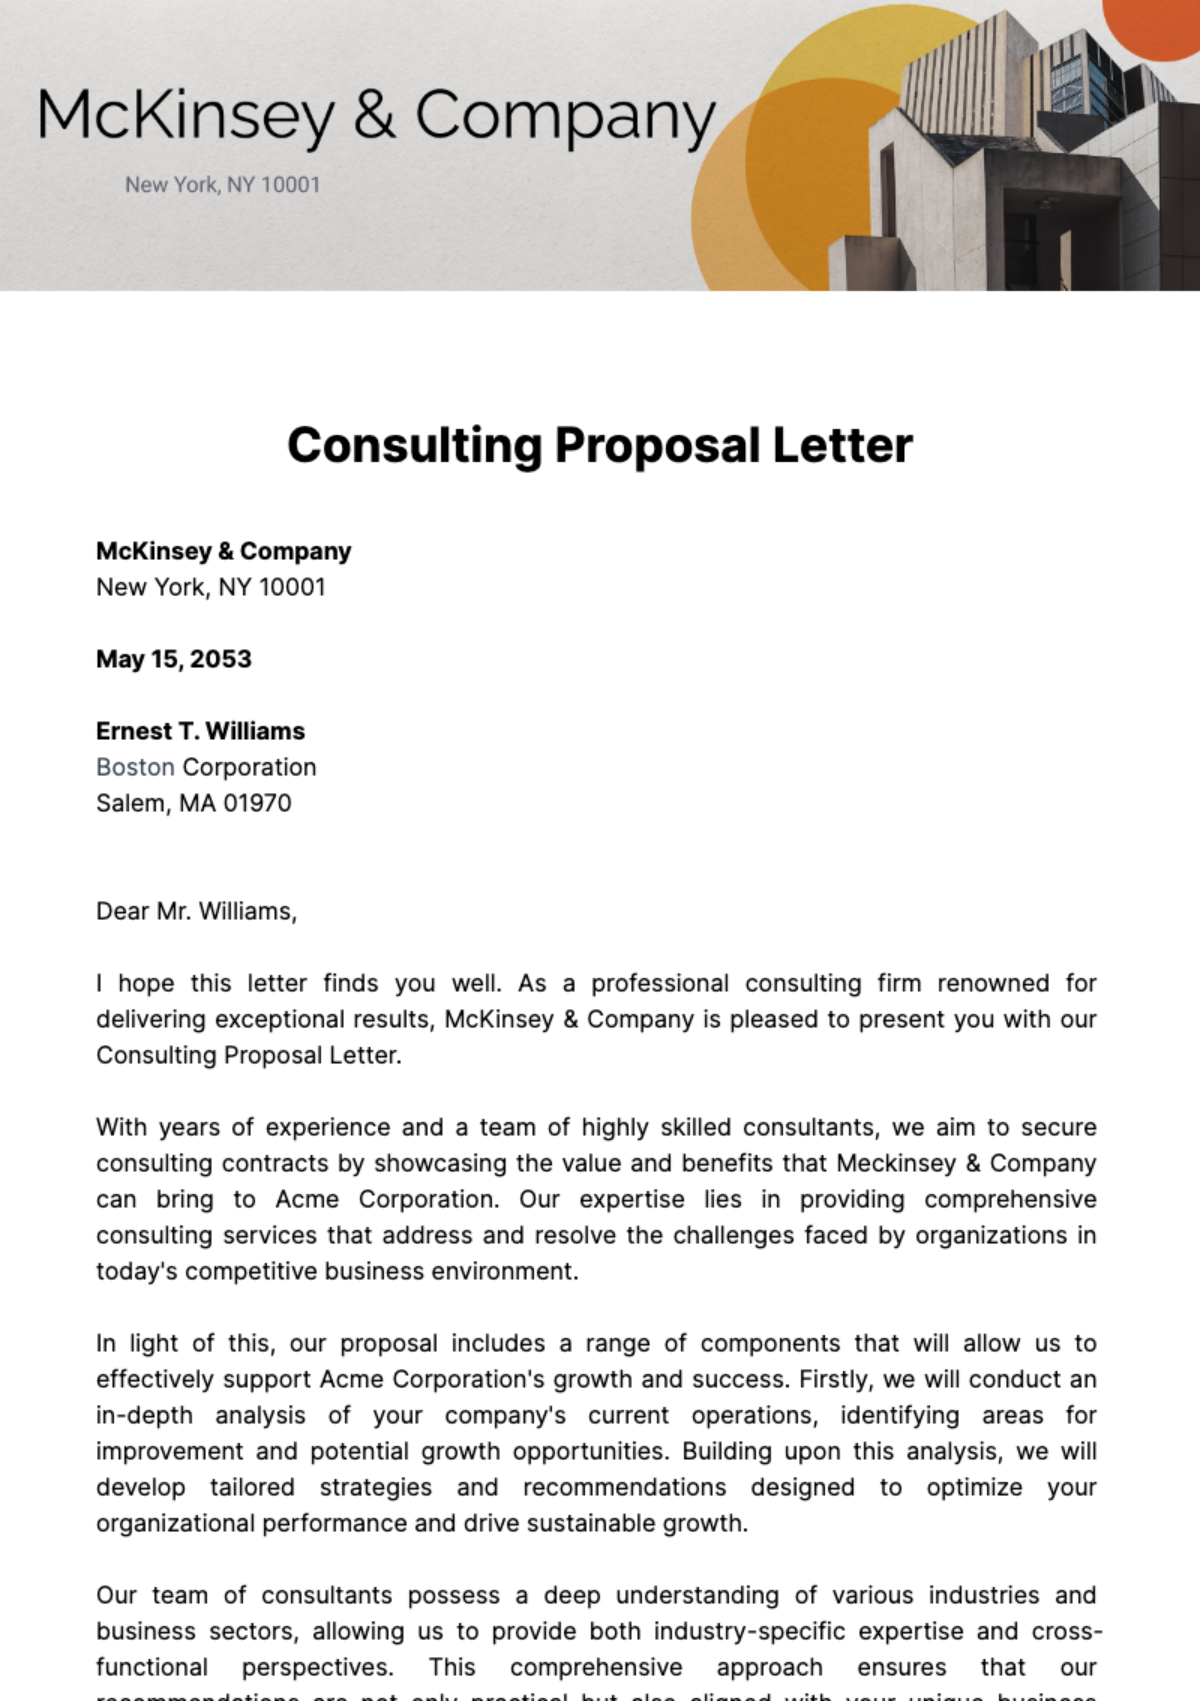 Consulting Proposal Letter Template